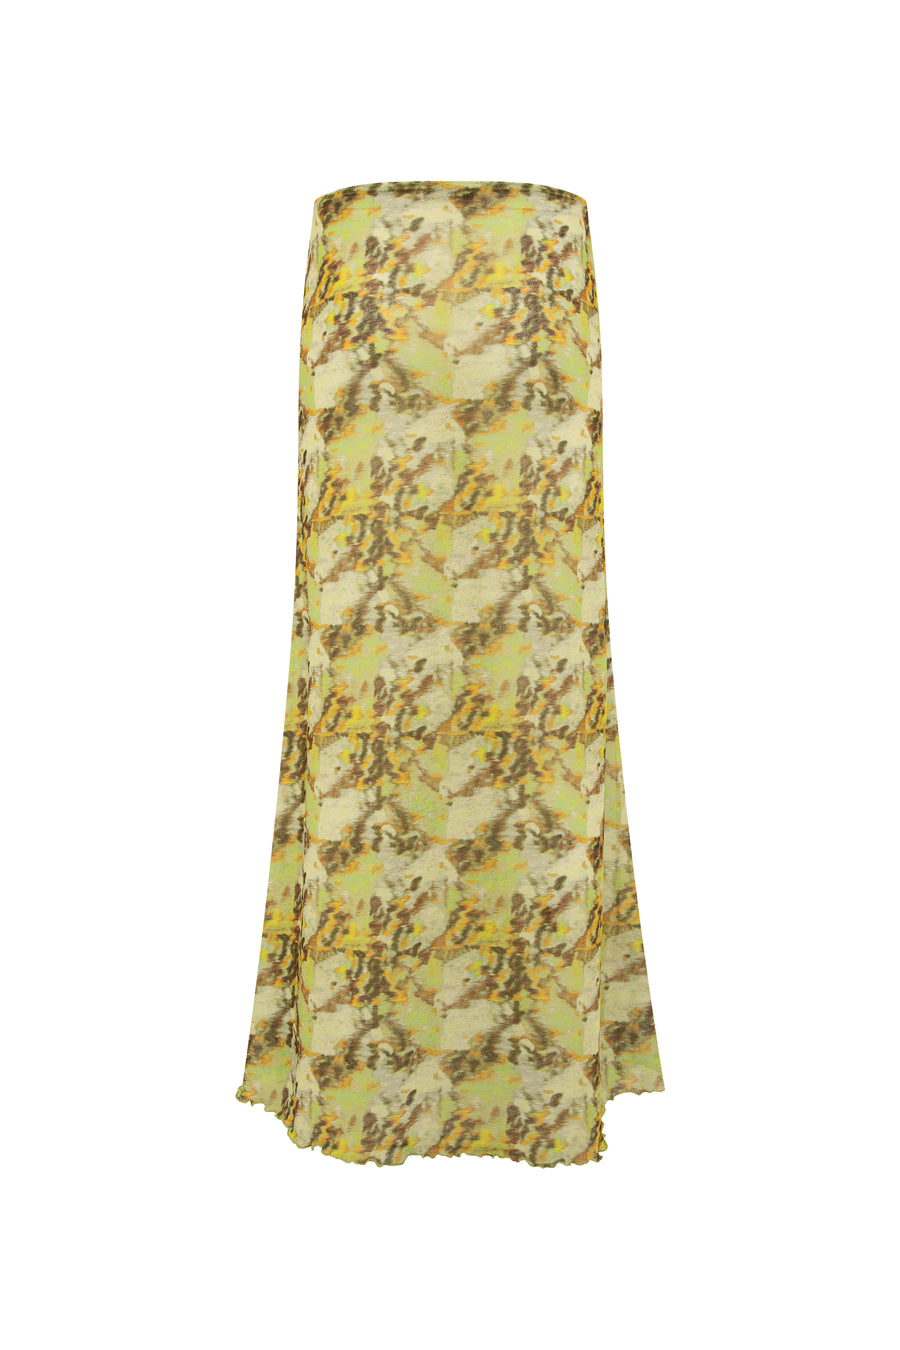 SINY - Low-rise printed maxi skirt